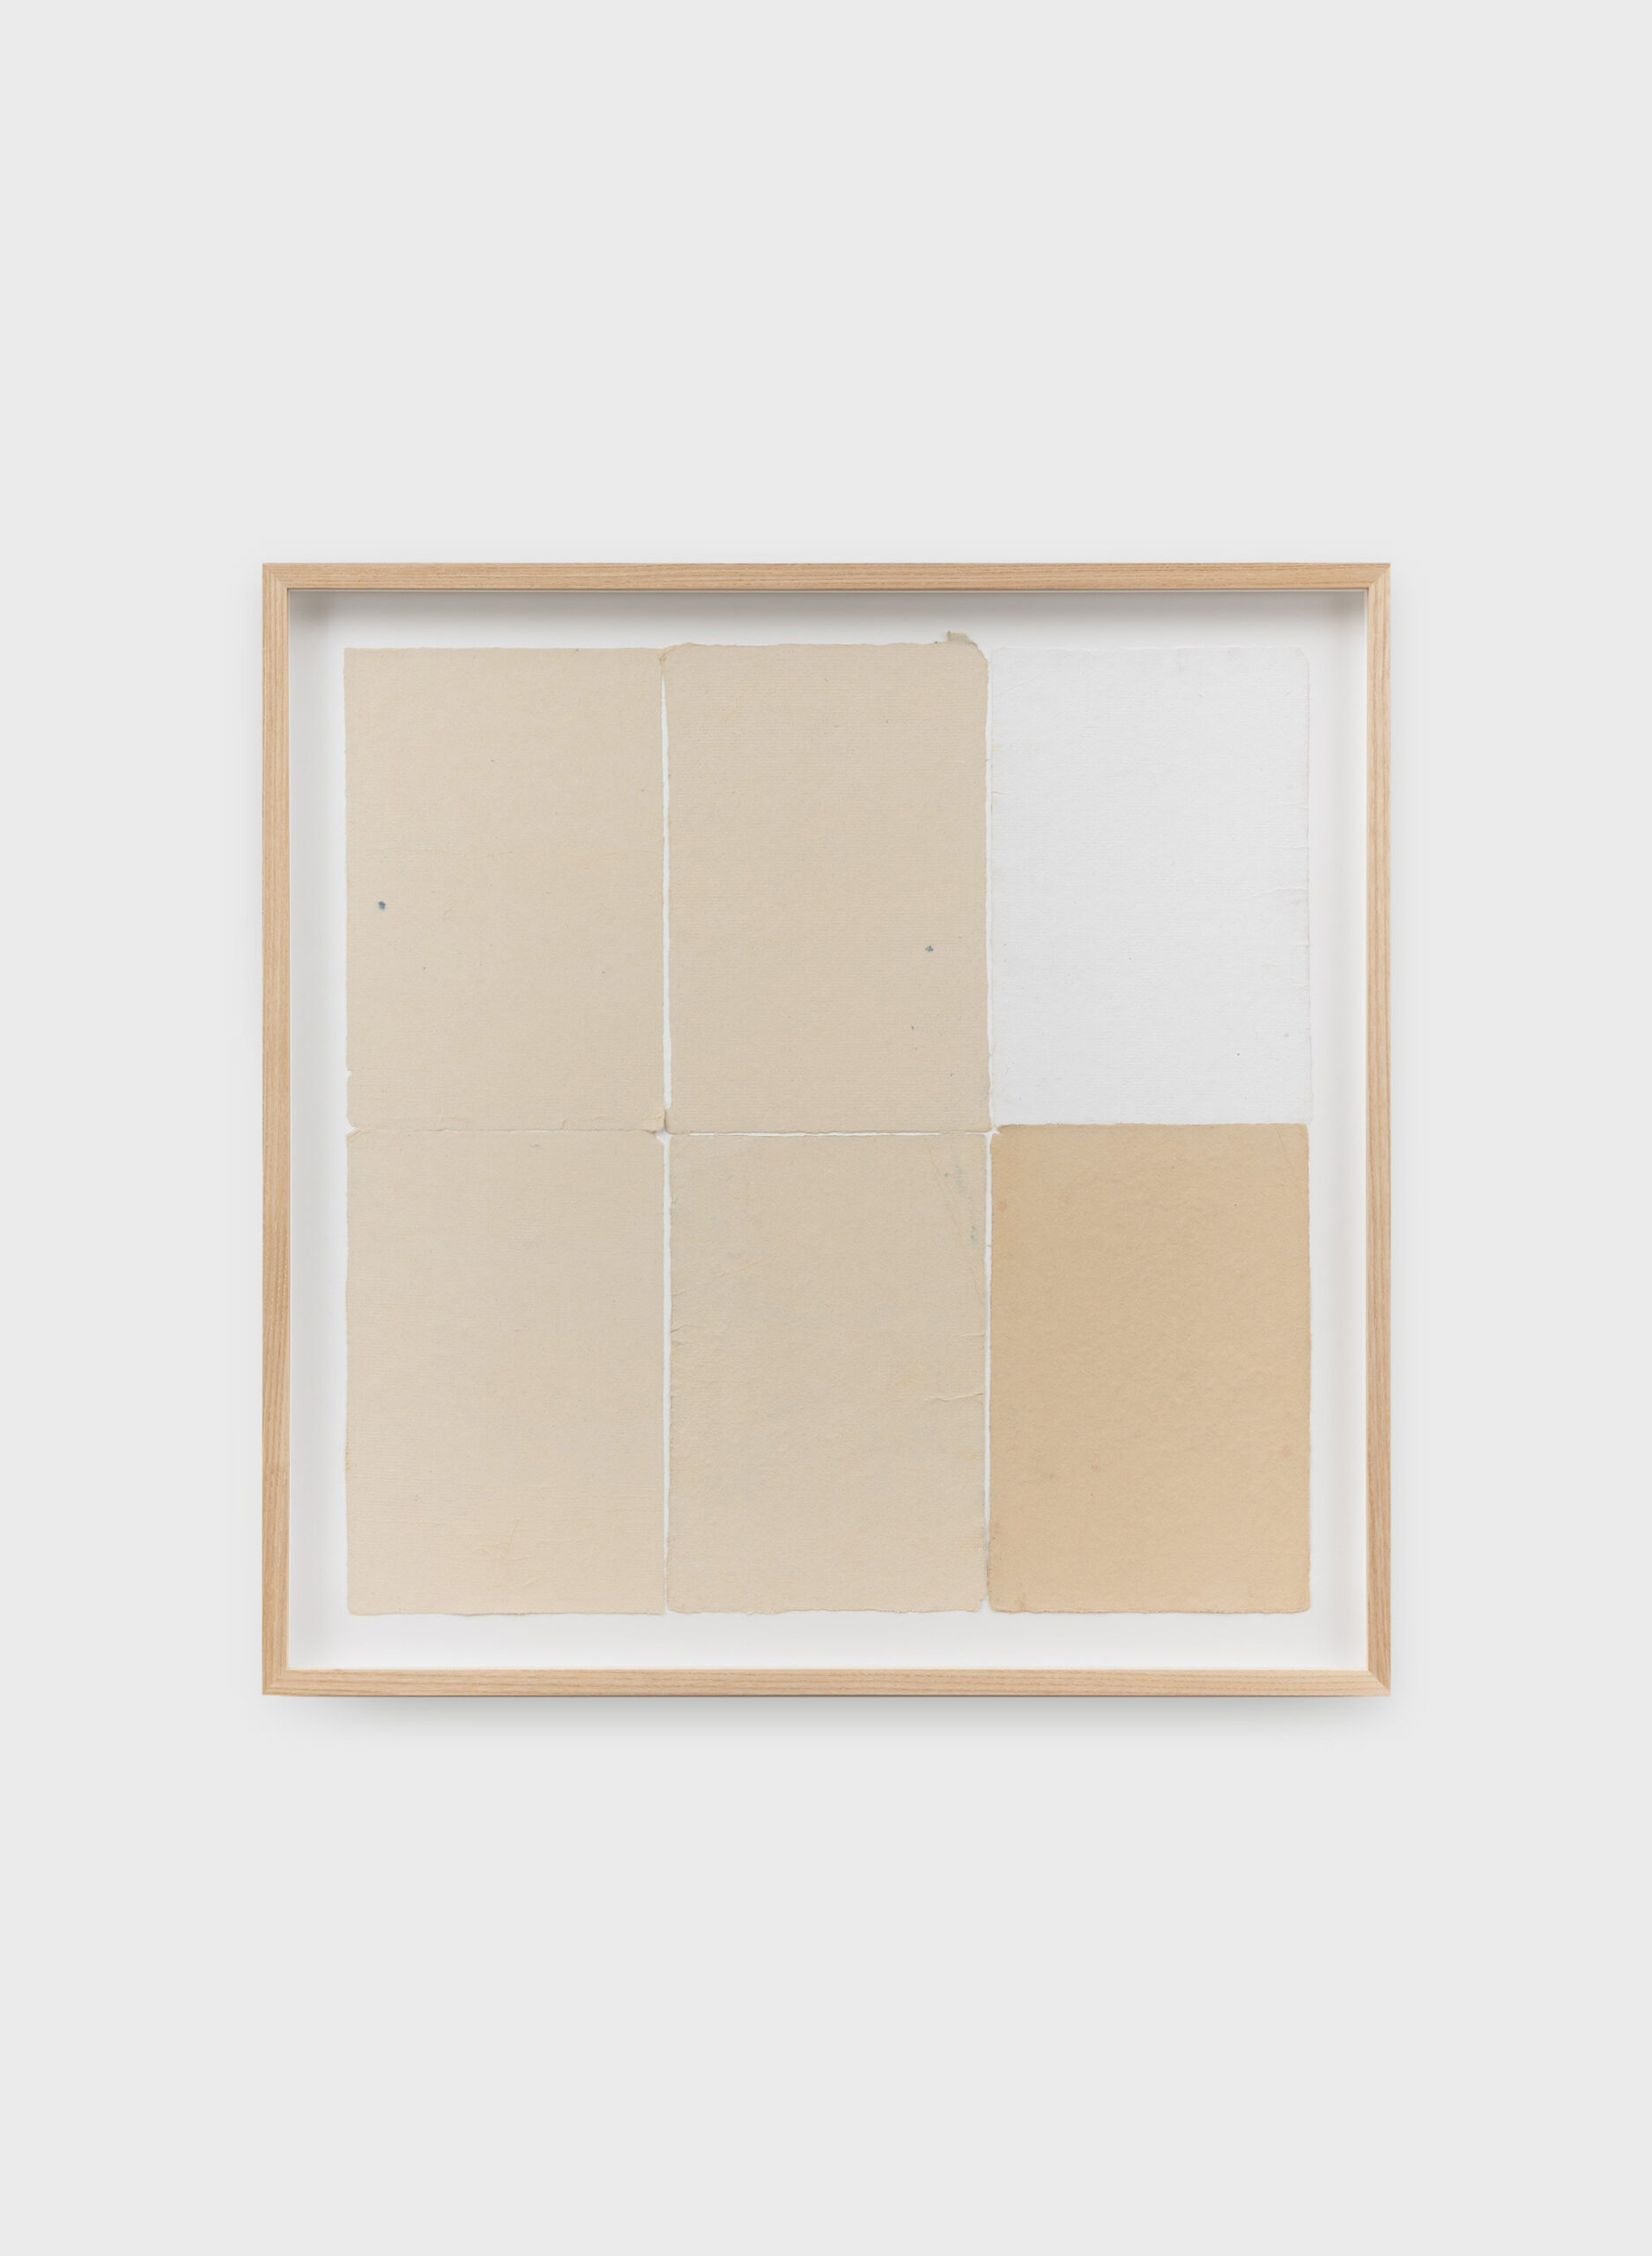 Ethan Cook, Five alabasters, white, 2020, Handmade pigmented paper, 50.2 x 49.5 cm © The Artist, Image Courtesy Nino Mier Gallery